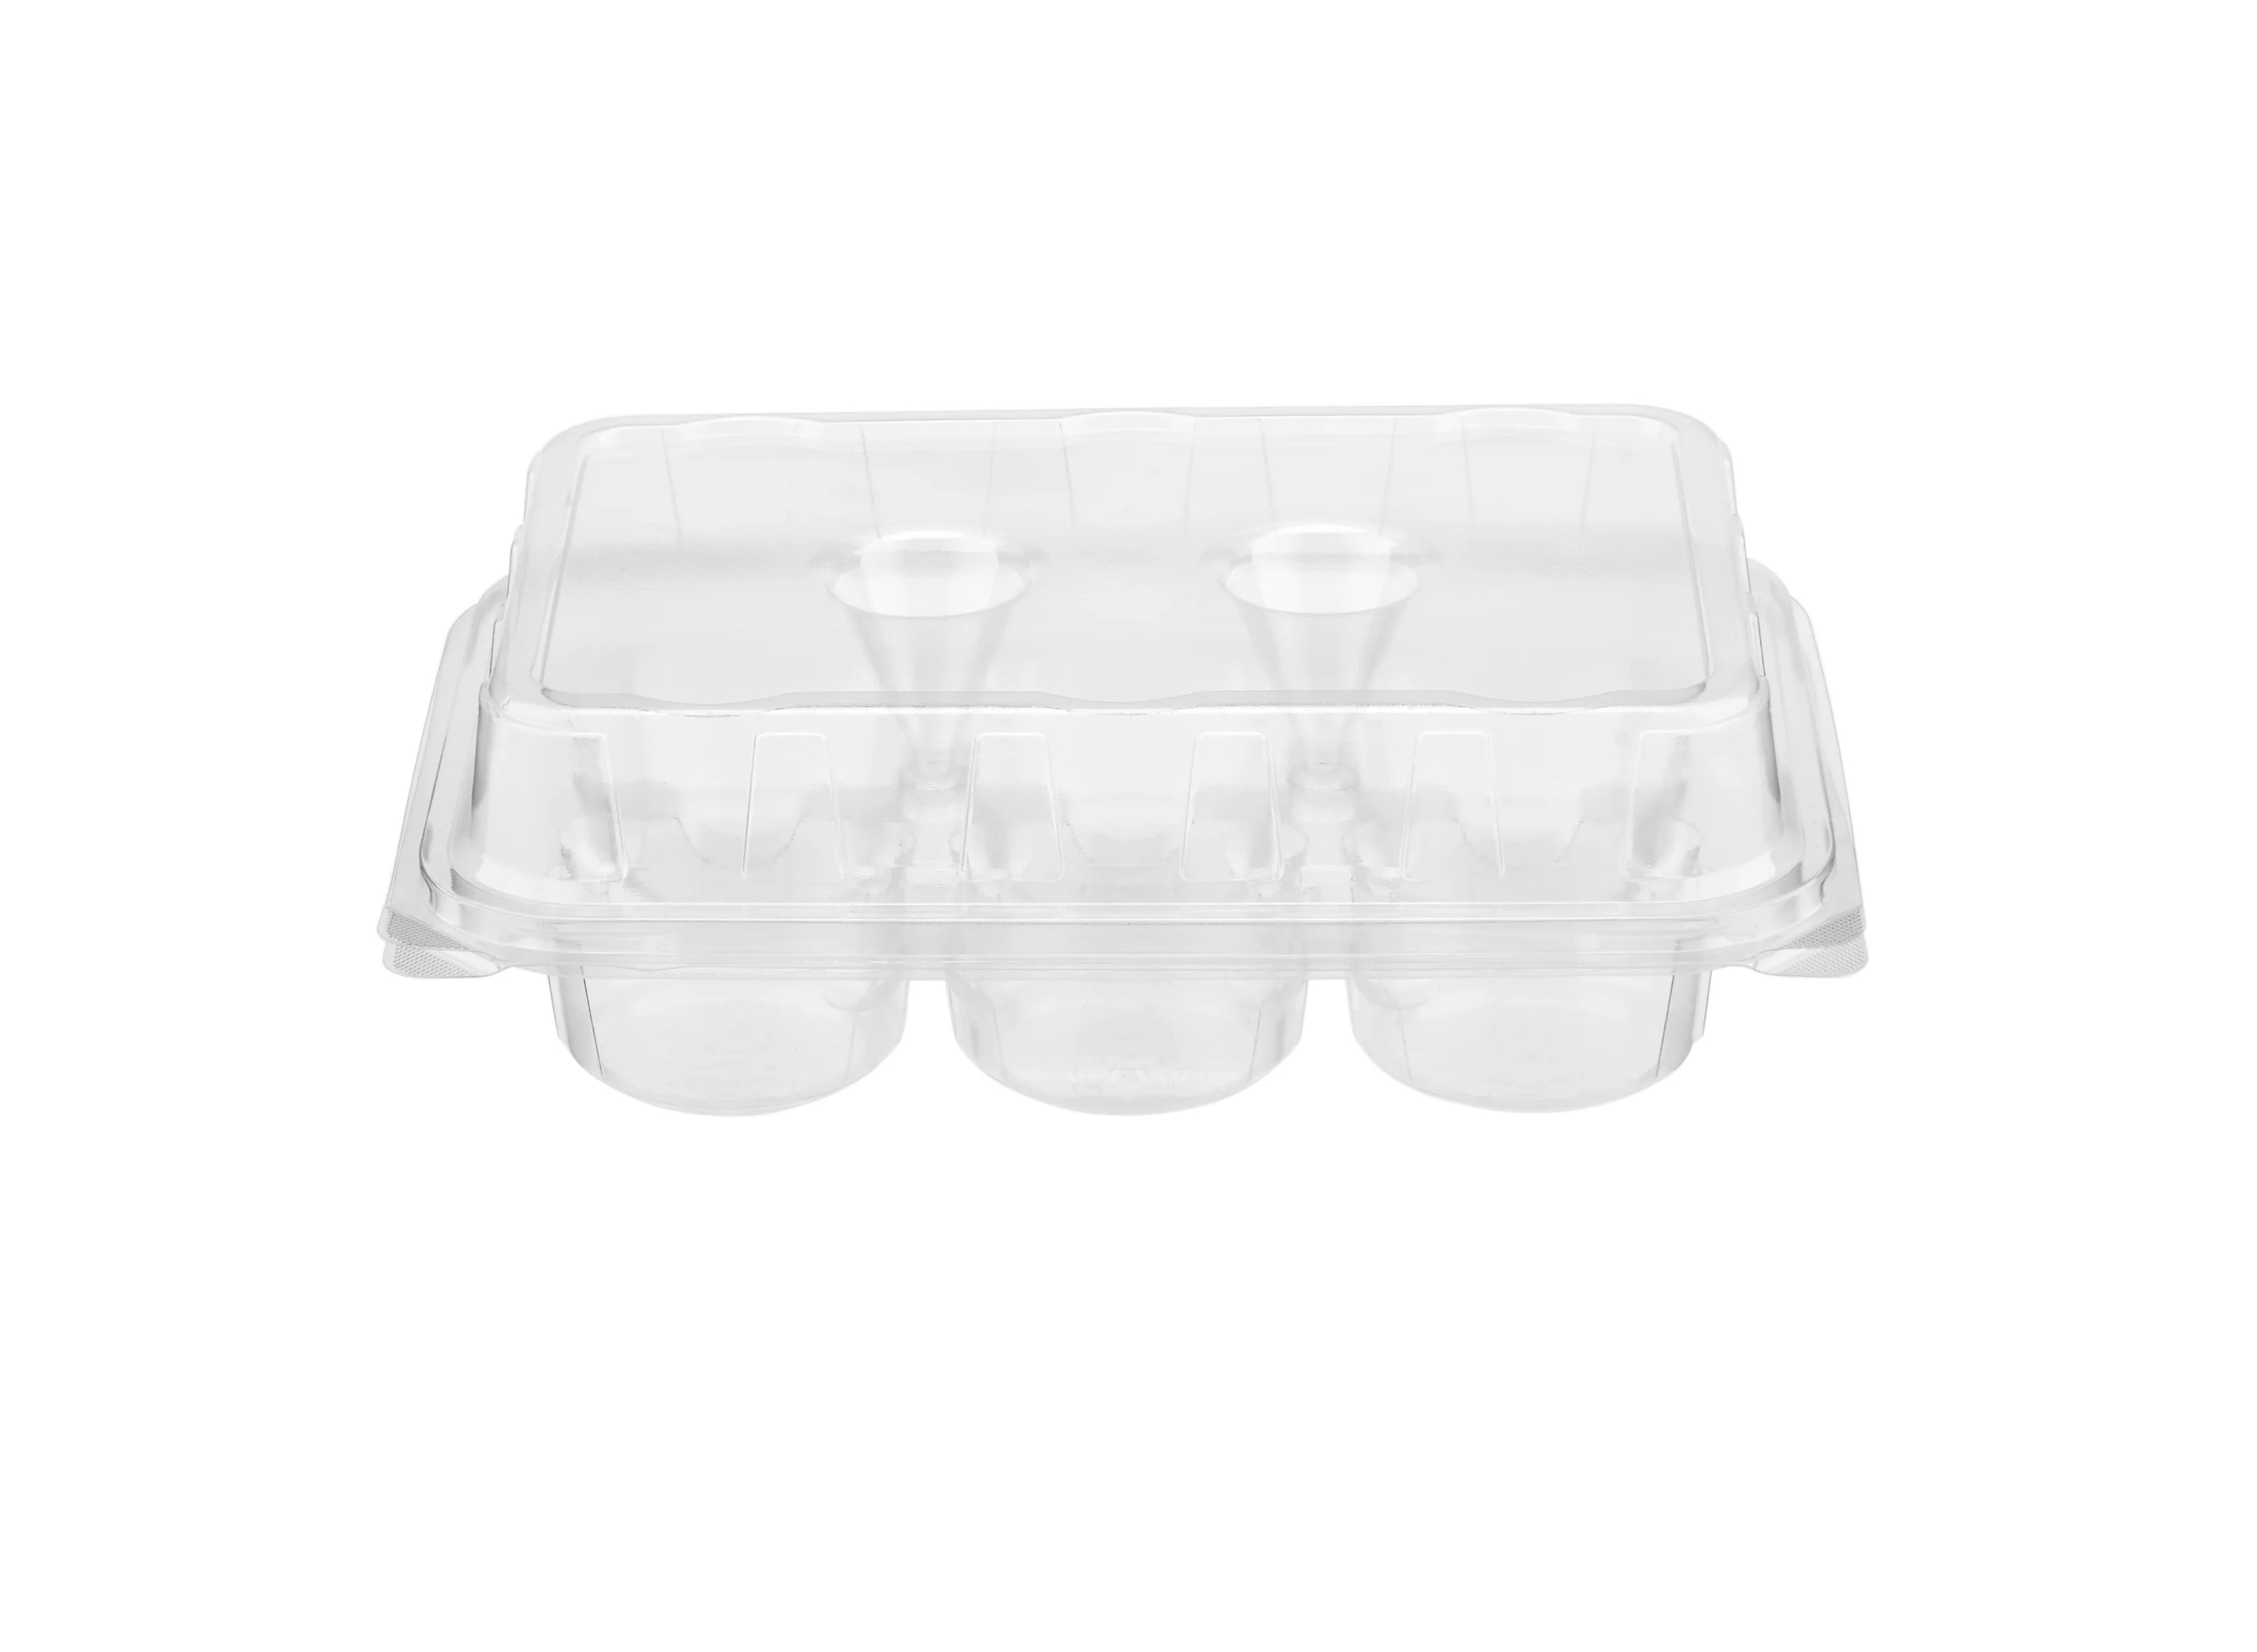 Compartment Muffin Tray Clear 